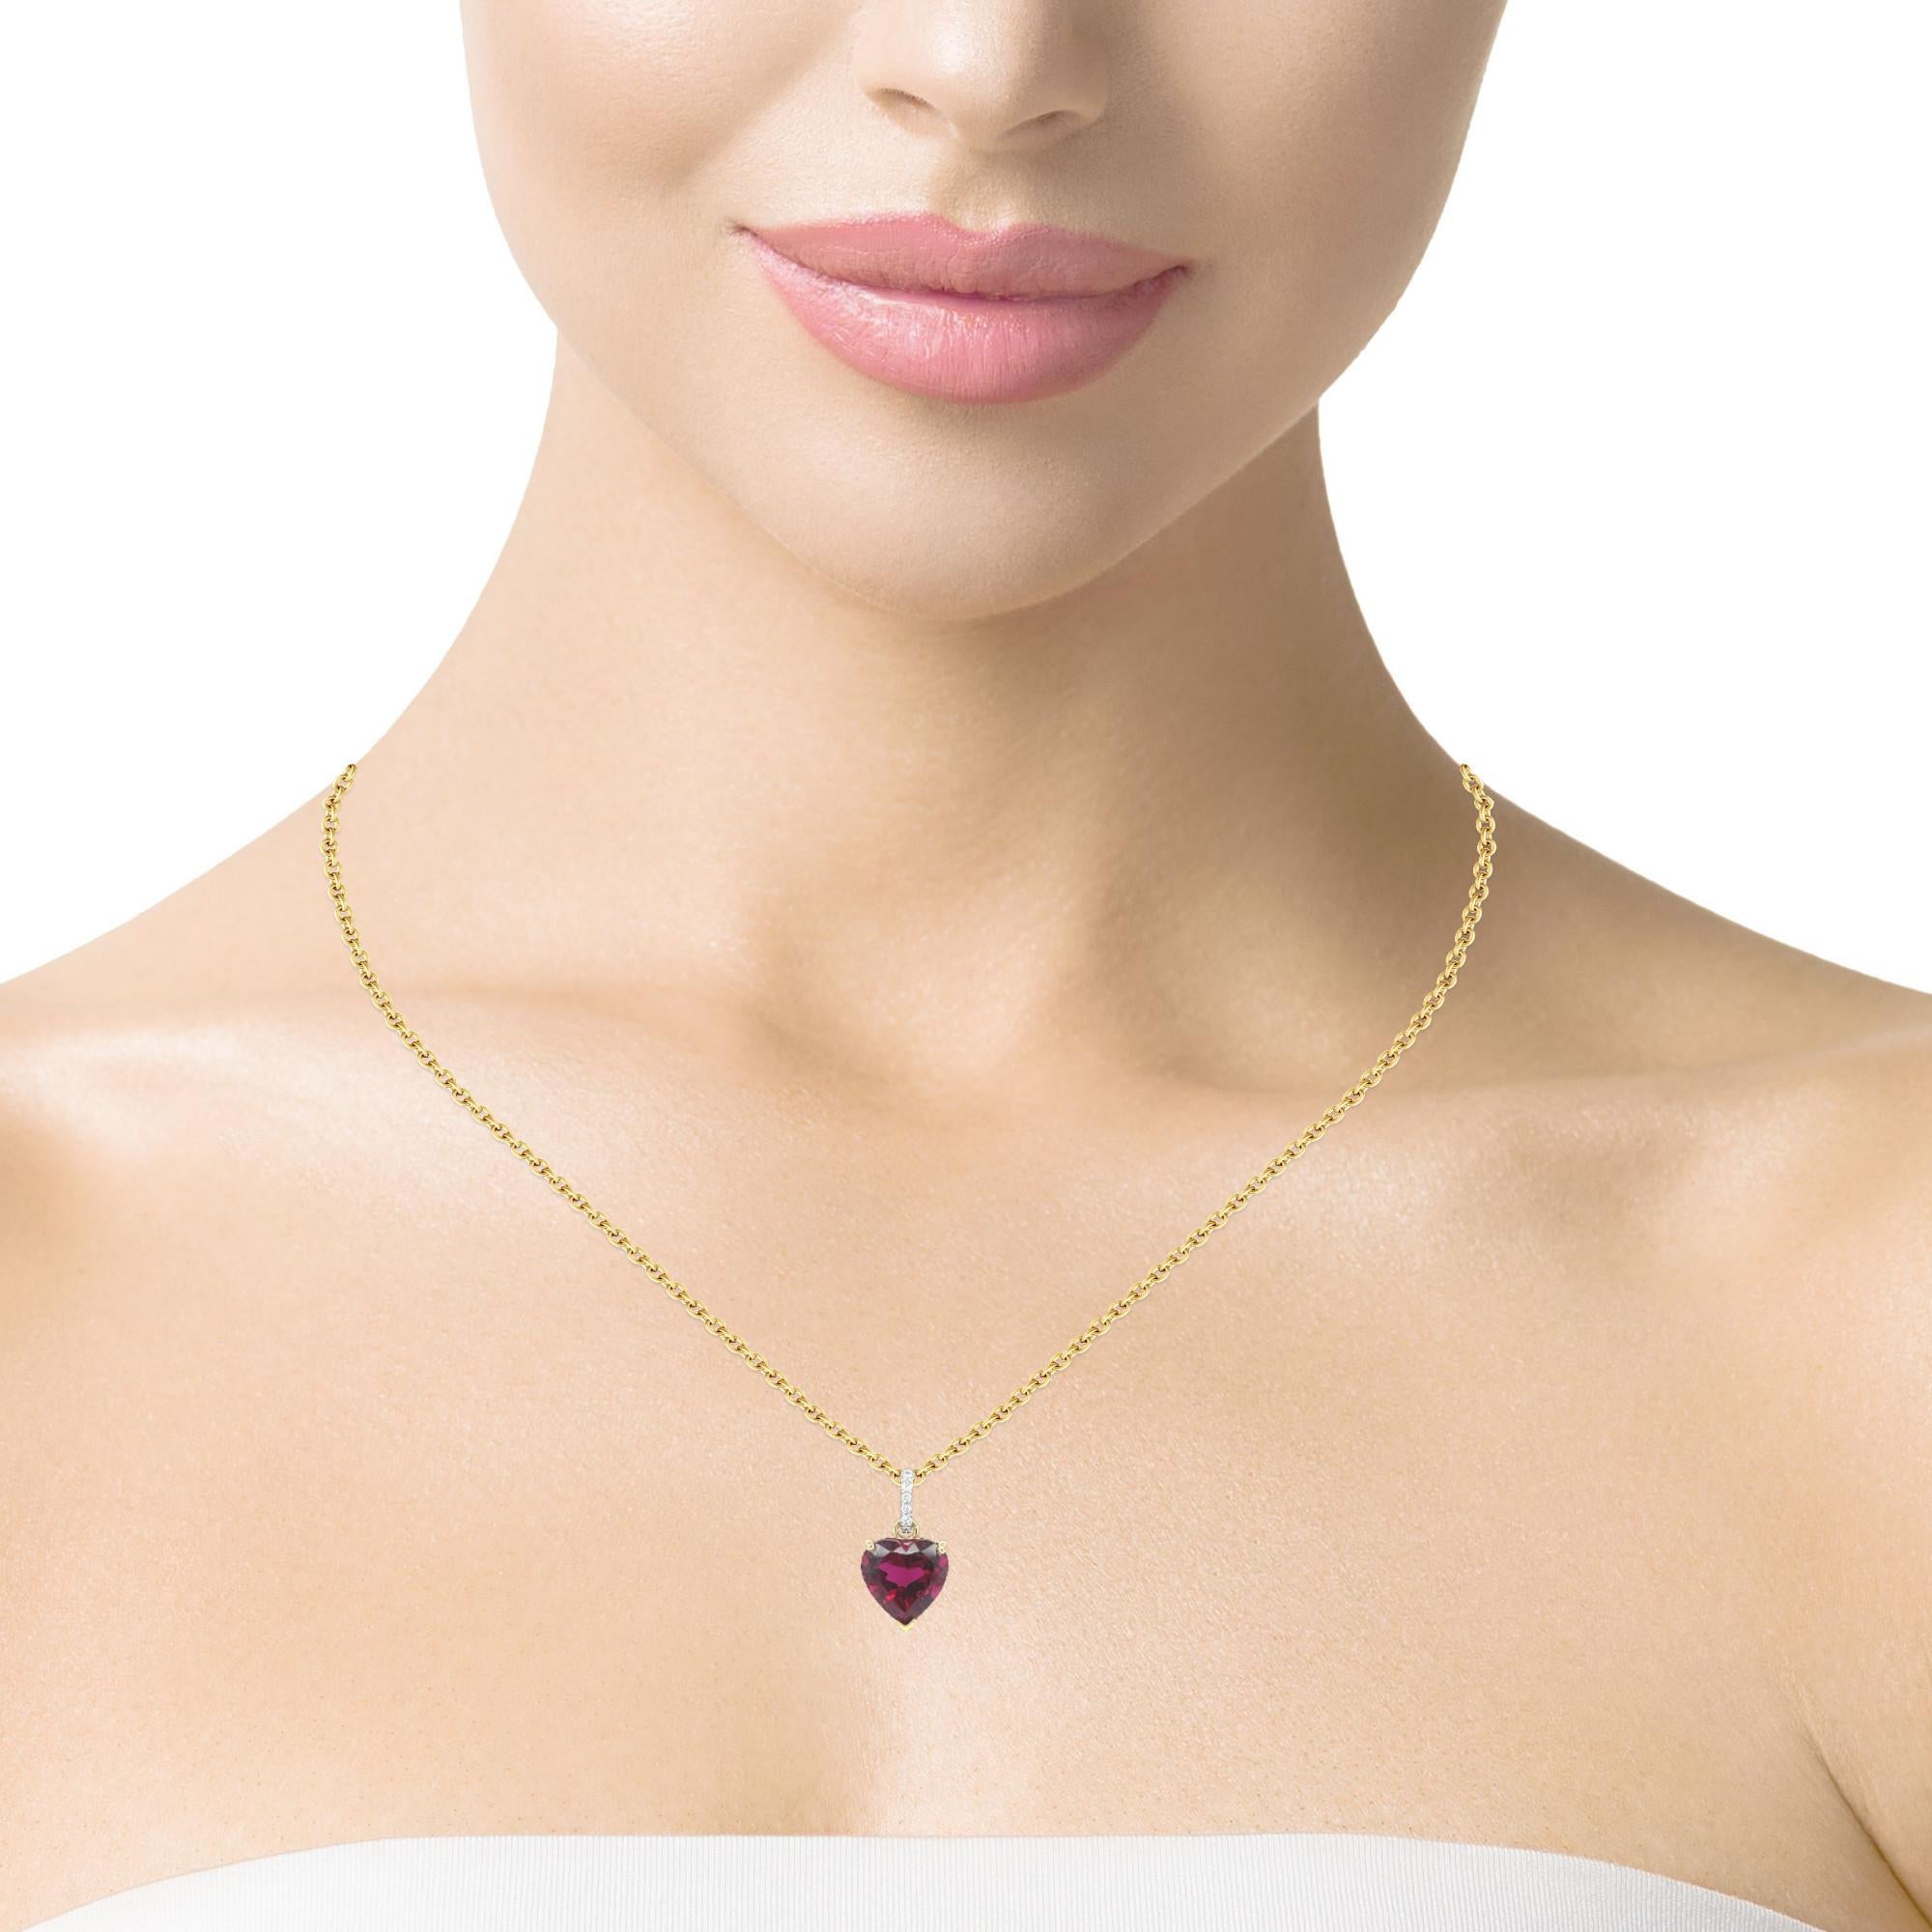 5.14 Carat Heart Shaped Rubellite Tourmaline & Diamond Necklace  In New Condition For Sale In Los Angeles, CA